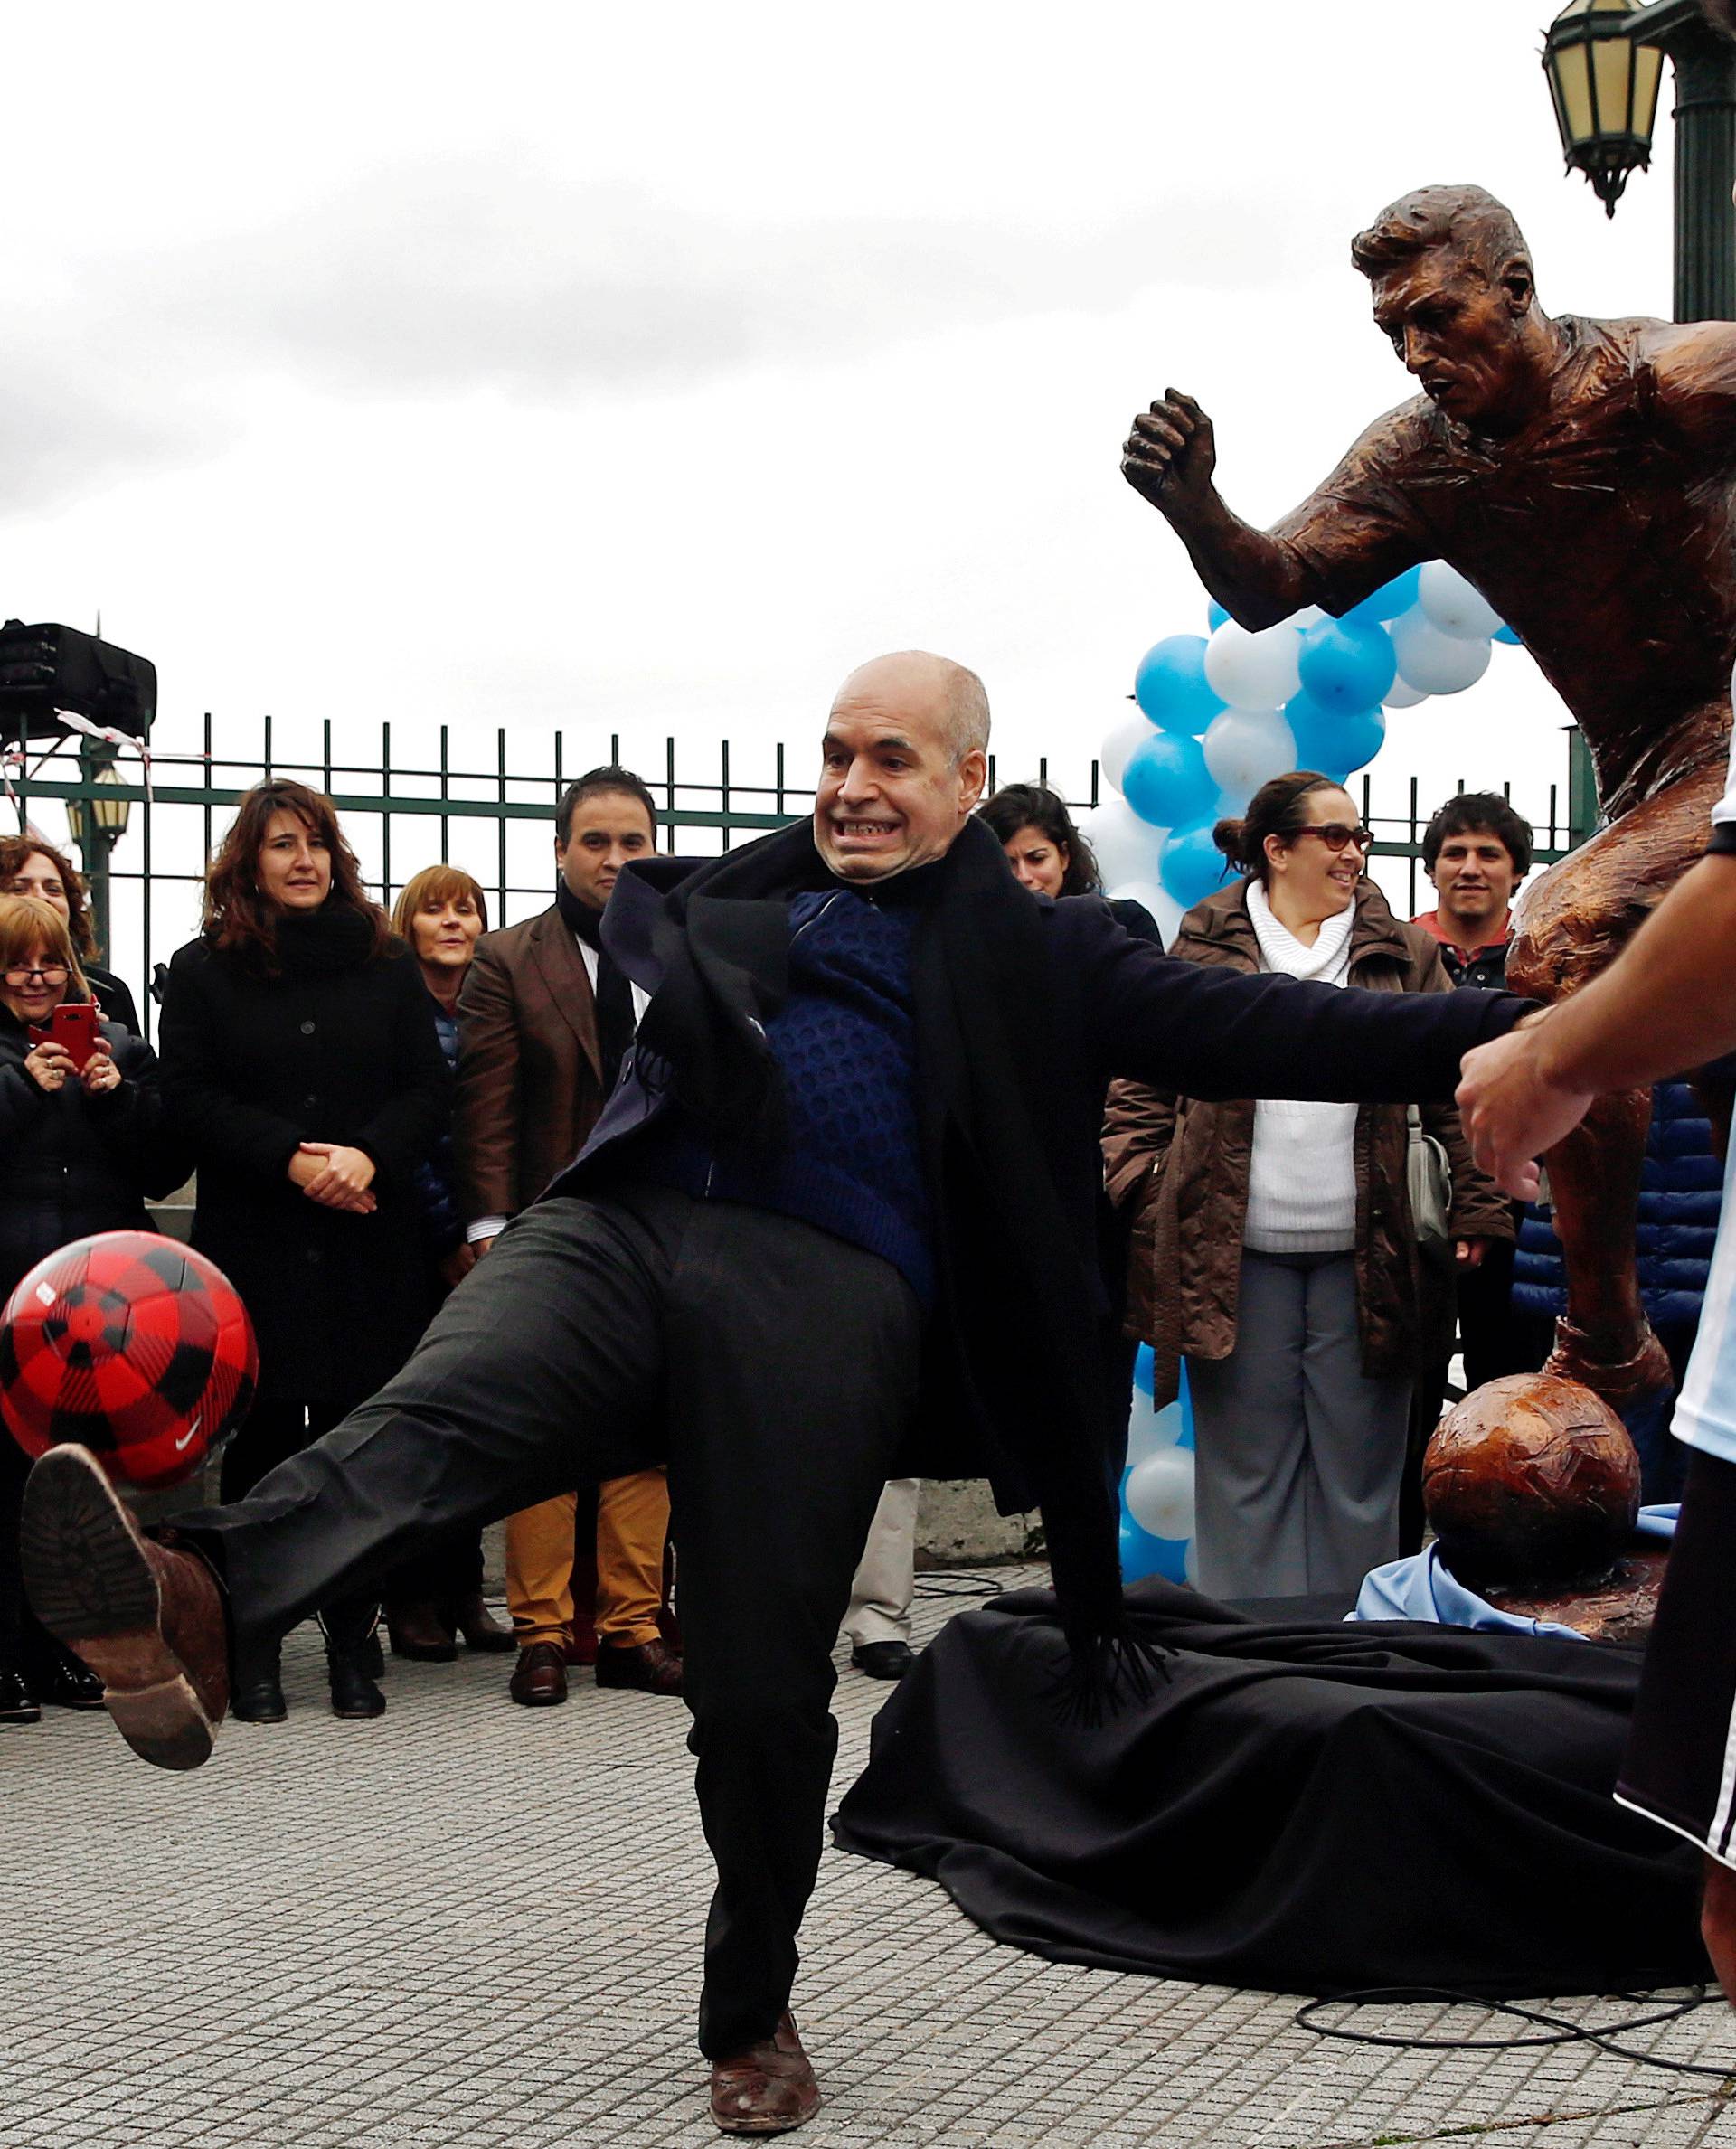 Buenos Aires City Mayor Rodriguez Larreta kicks a ball in front of the statue of Argentina's soccer player Messi after it was unveiled in Buenos Aires